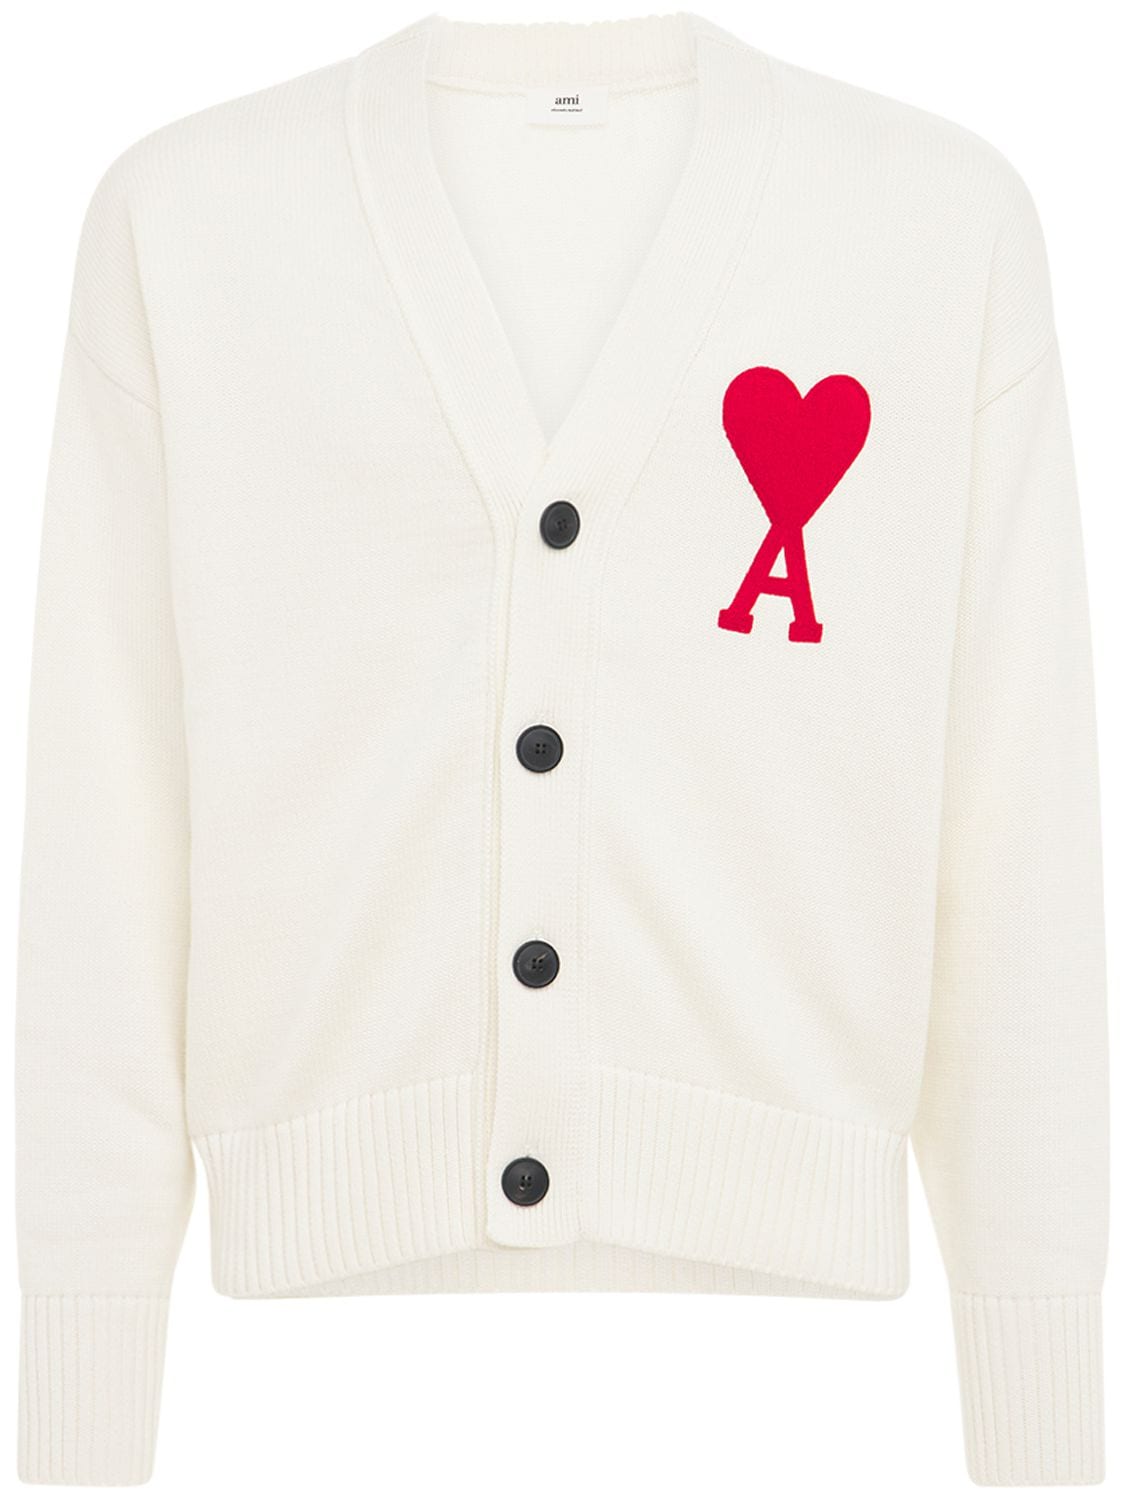 Ami Alexandre Mattiussi Logo Over Cotton & Wool Knit Cardigan In White,red